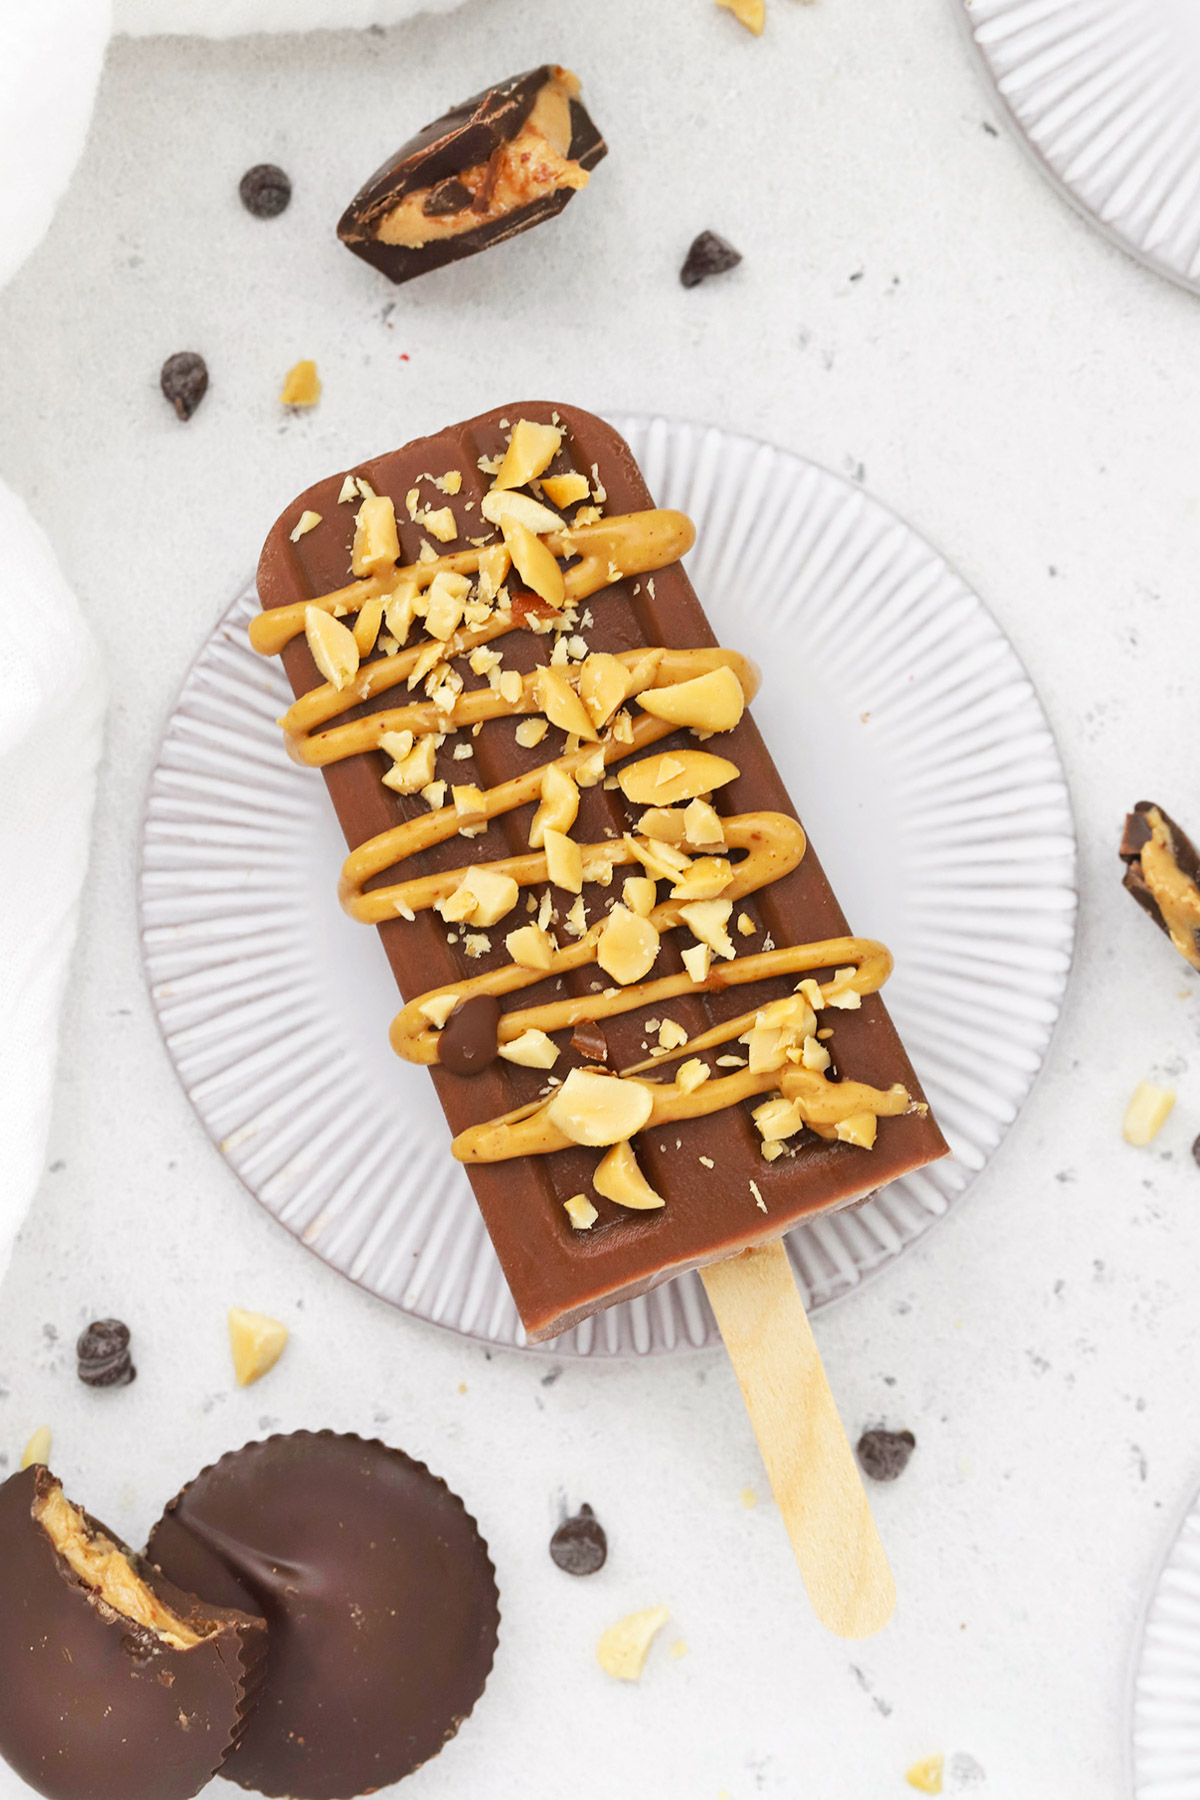 Overhead view of a chocolate peanut butter popsicle drizzled with natural peanut butter and sprinkled with crushed peanuts